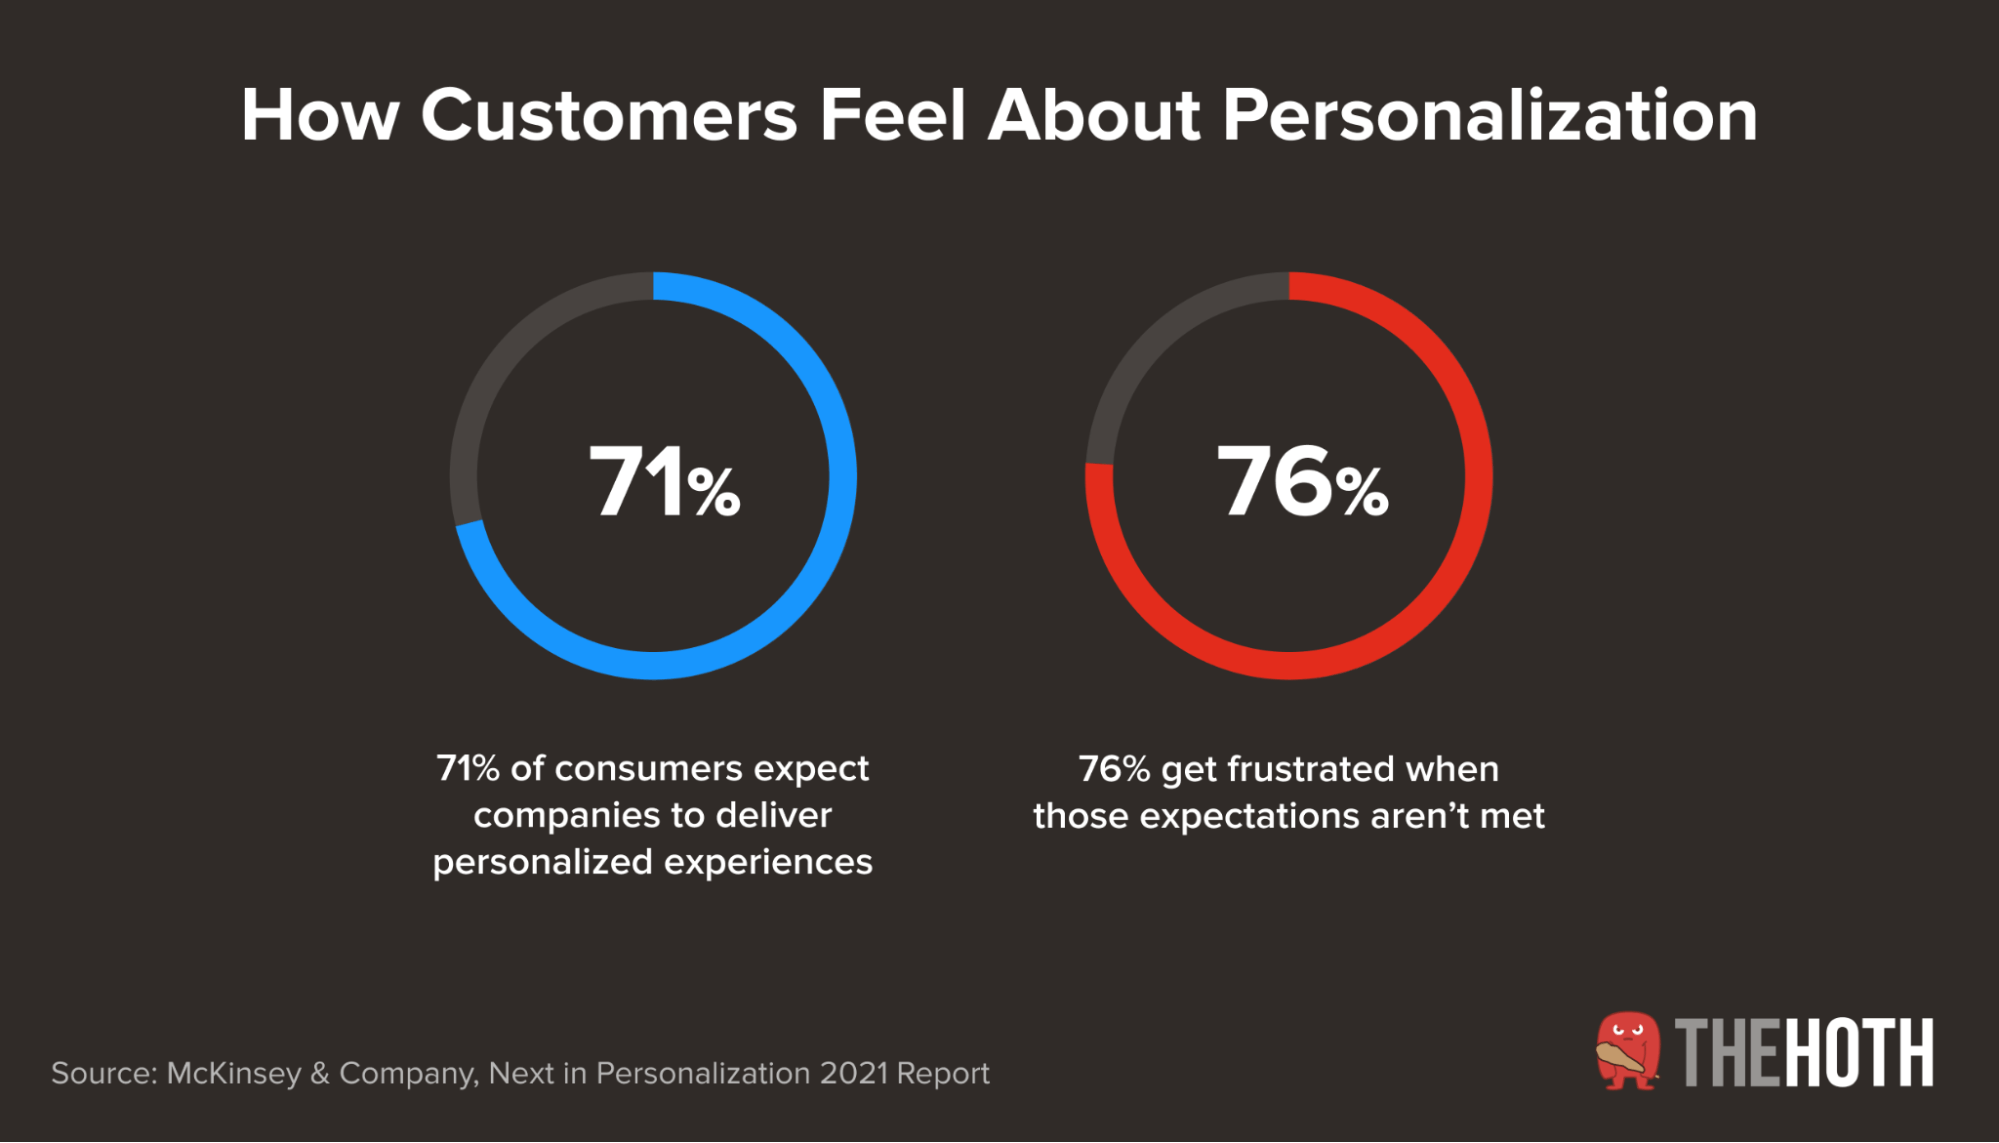 71% of consumers expect companies to deliver personalized experiences